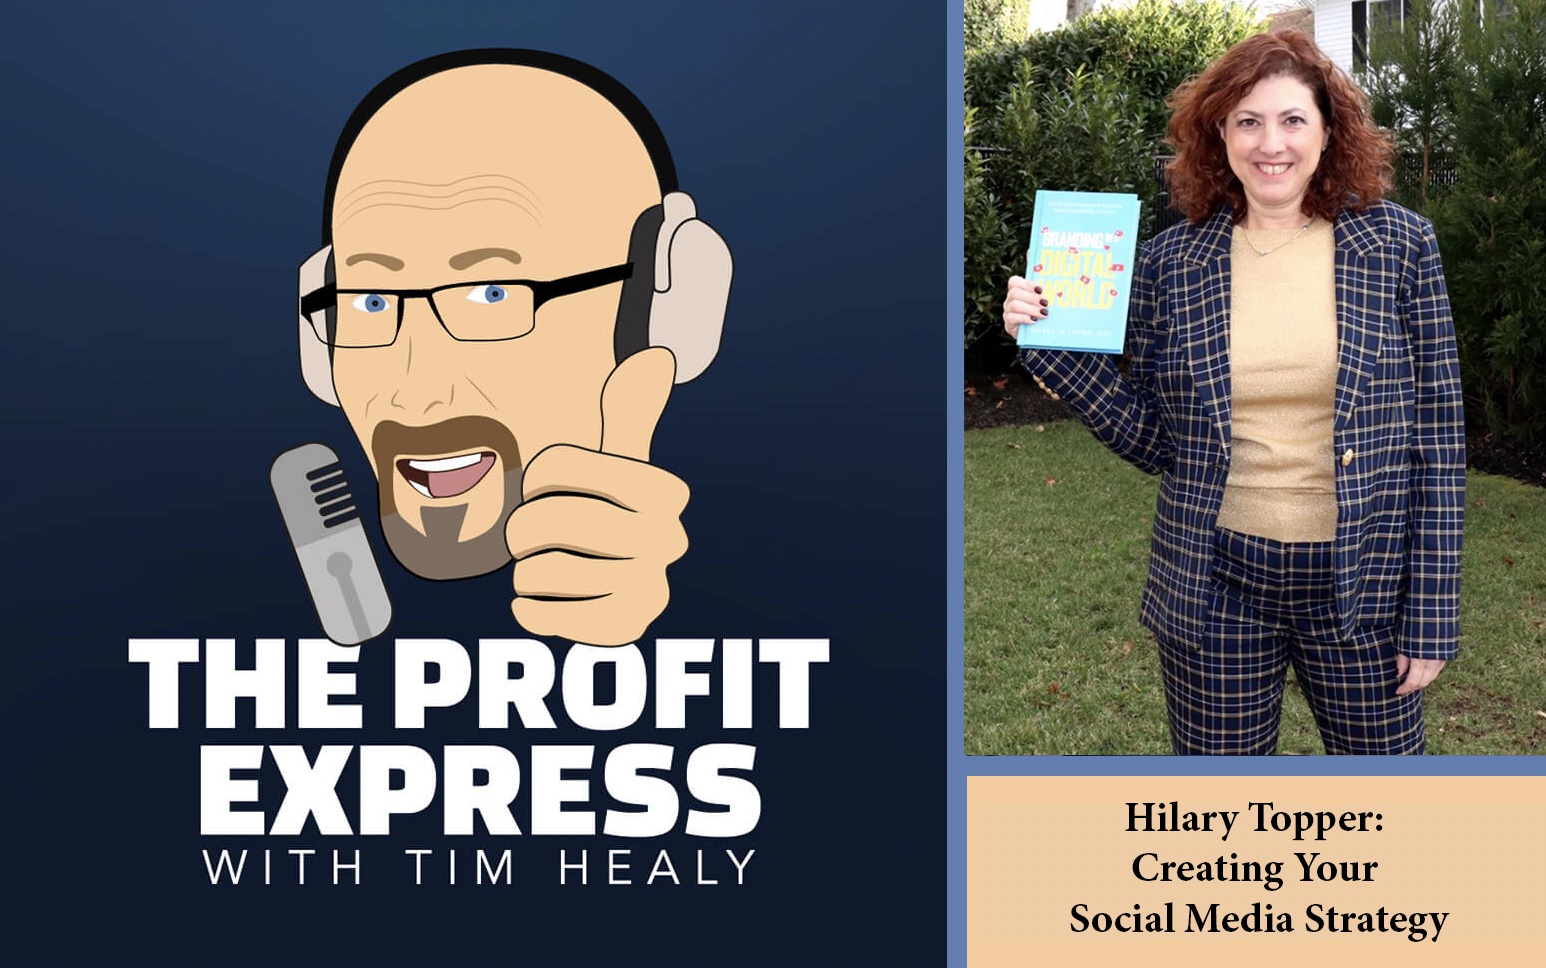 Hilary Topper: Creating Your Social Media Strategy